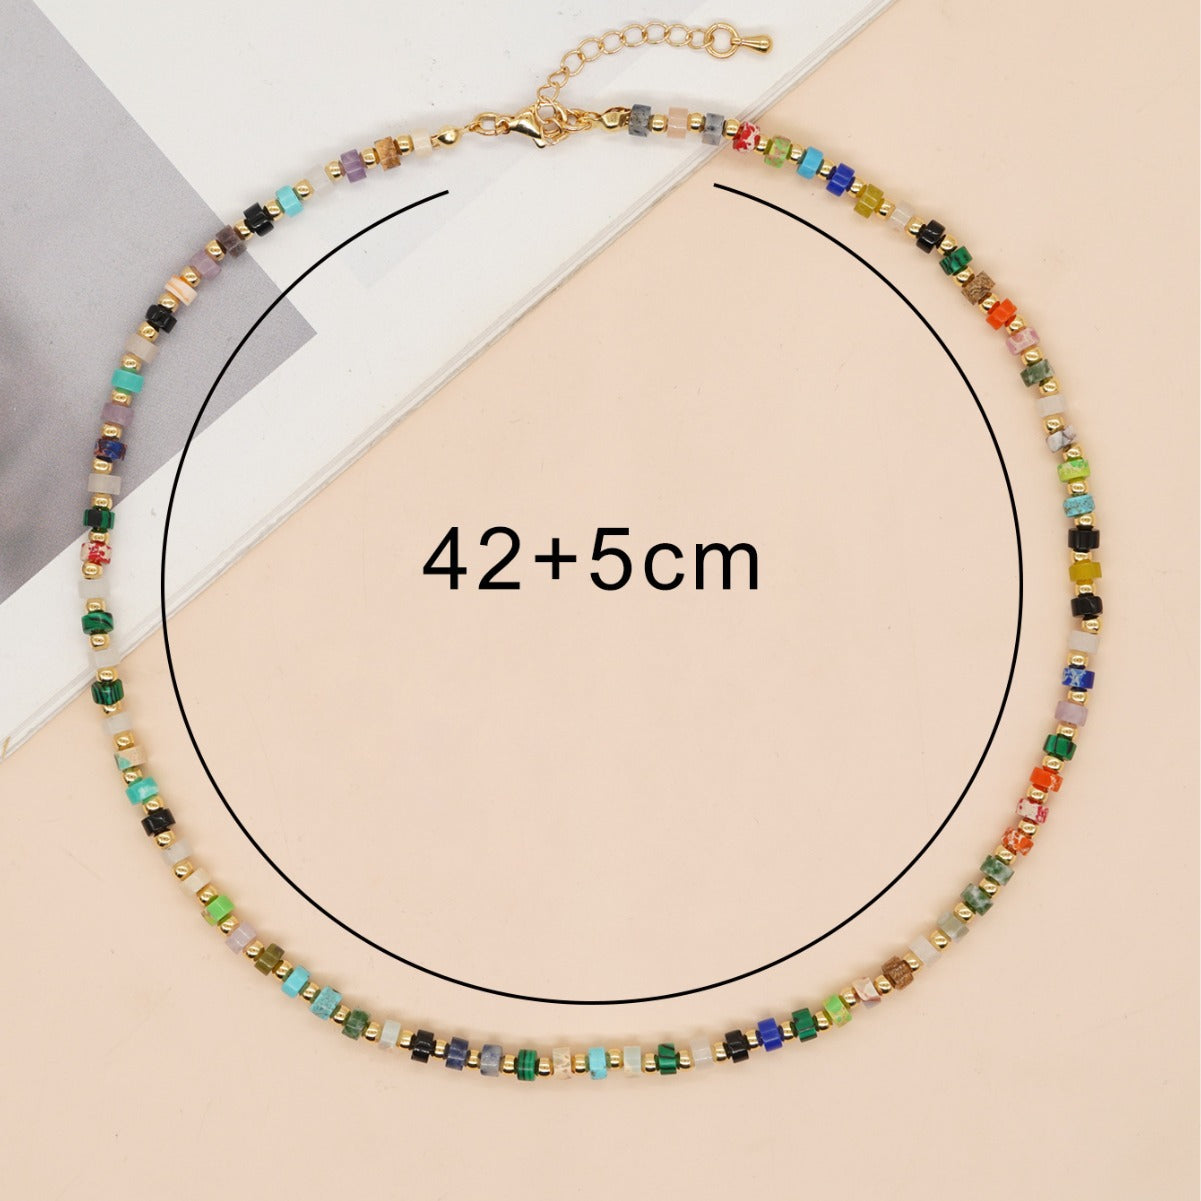 Bohemian 16" Mulit Natural Stones Coin Beads Necklace, Handmade Boho Summer Jewelry AL866